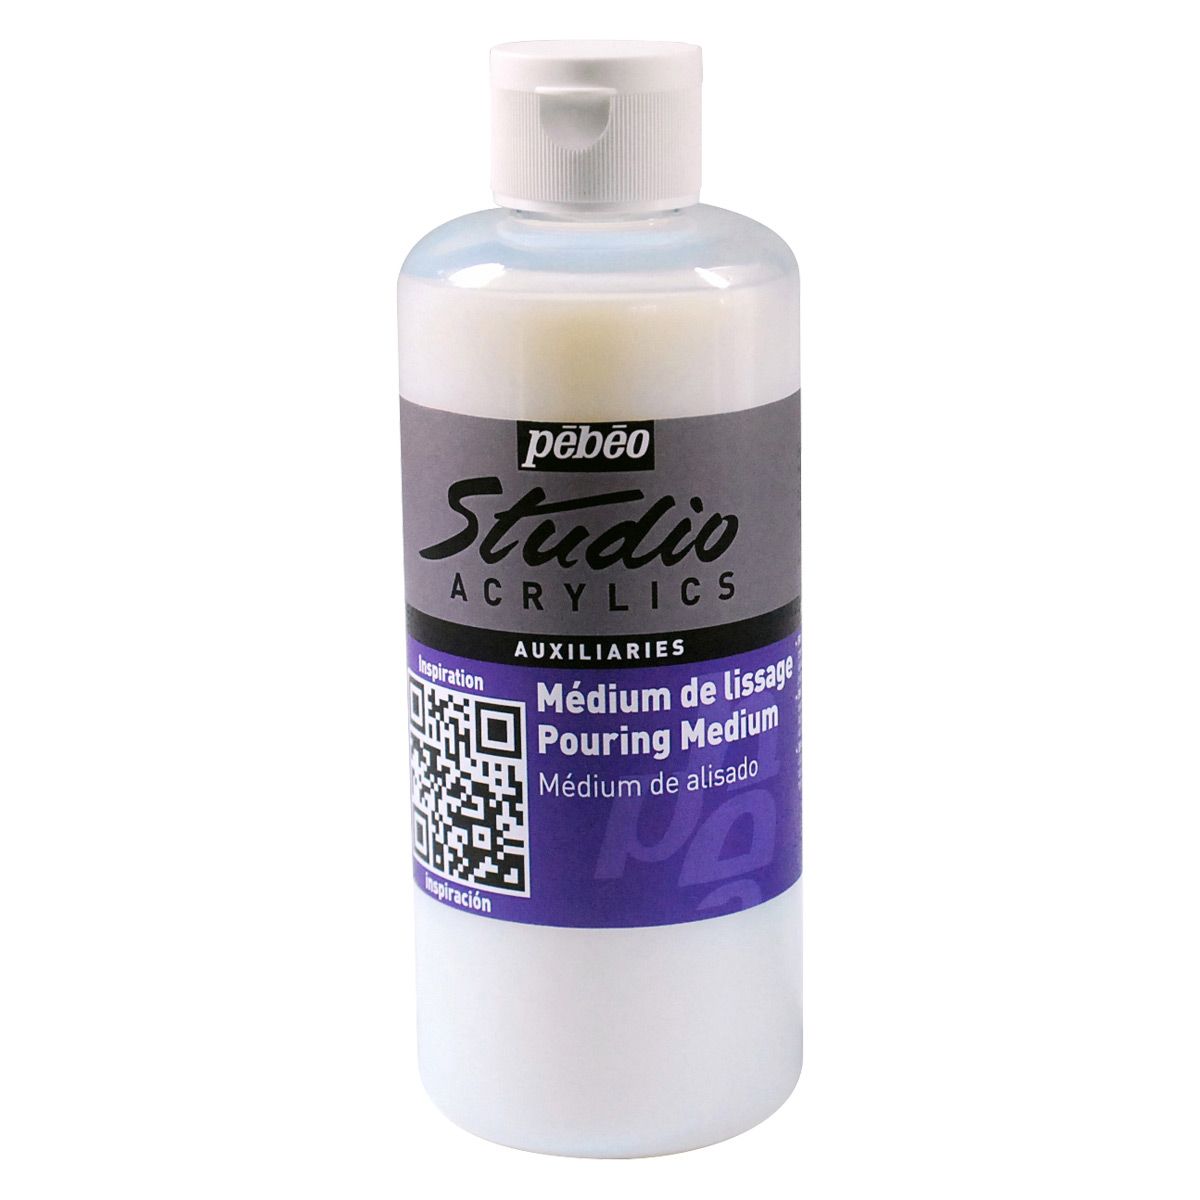 Pouring Medium Acrylic Paint, Silicone Drawing Tool